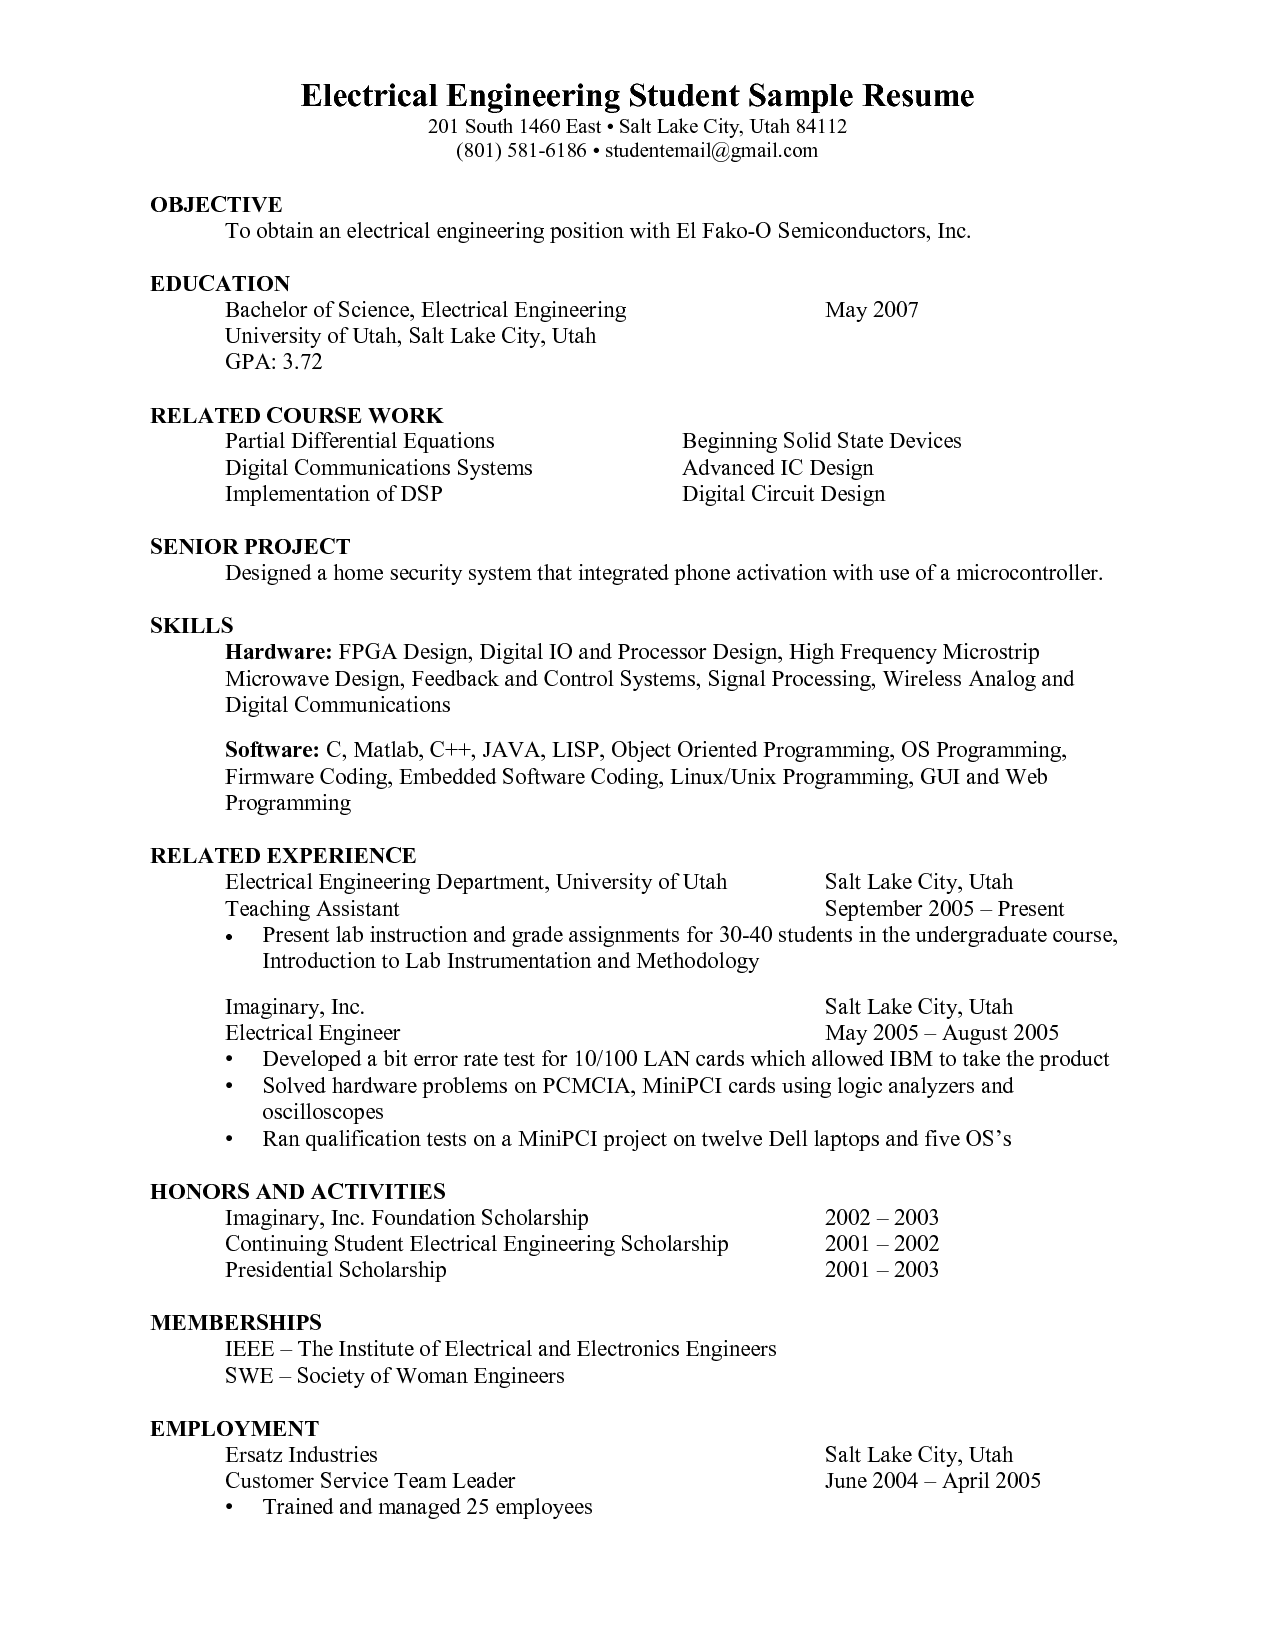 electronic engineer student resume samples   Ecza.solinf.co